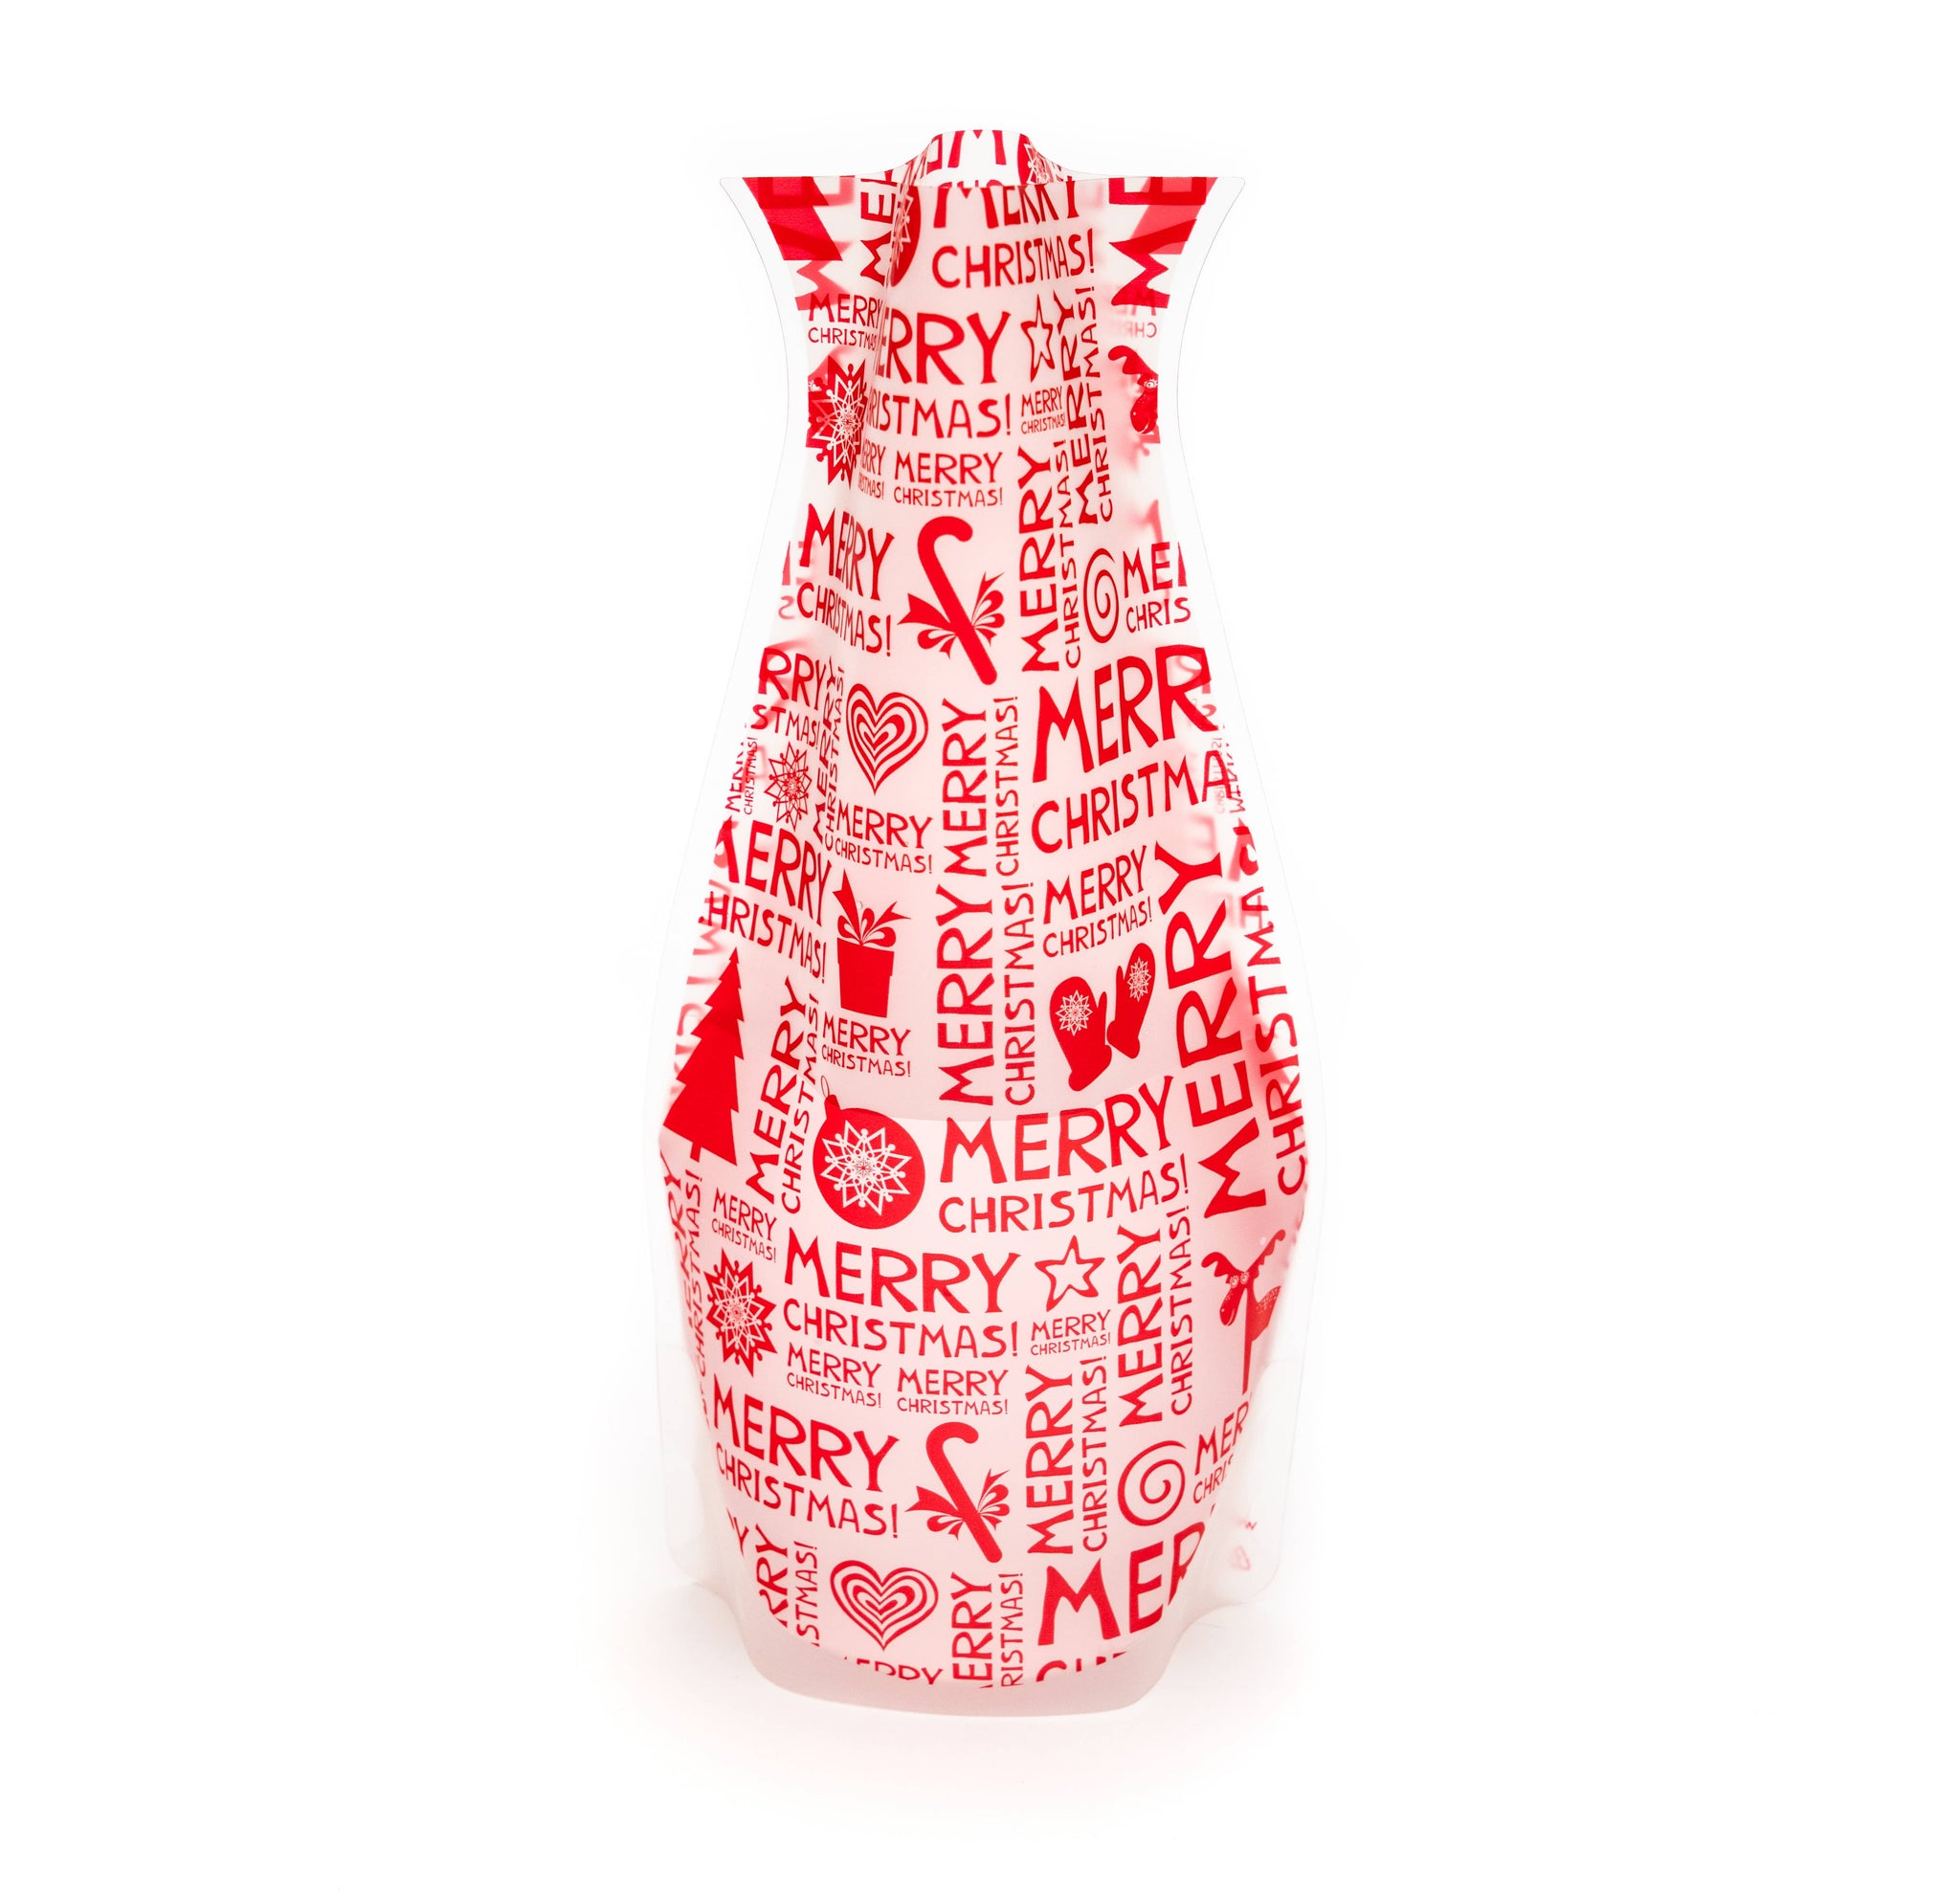 Modgy Expandable Christmas Holiday Vase - MerryMerry